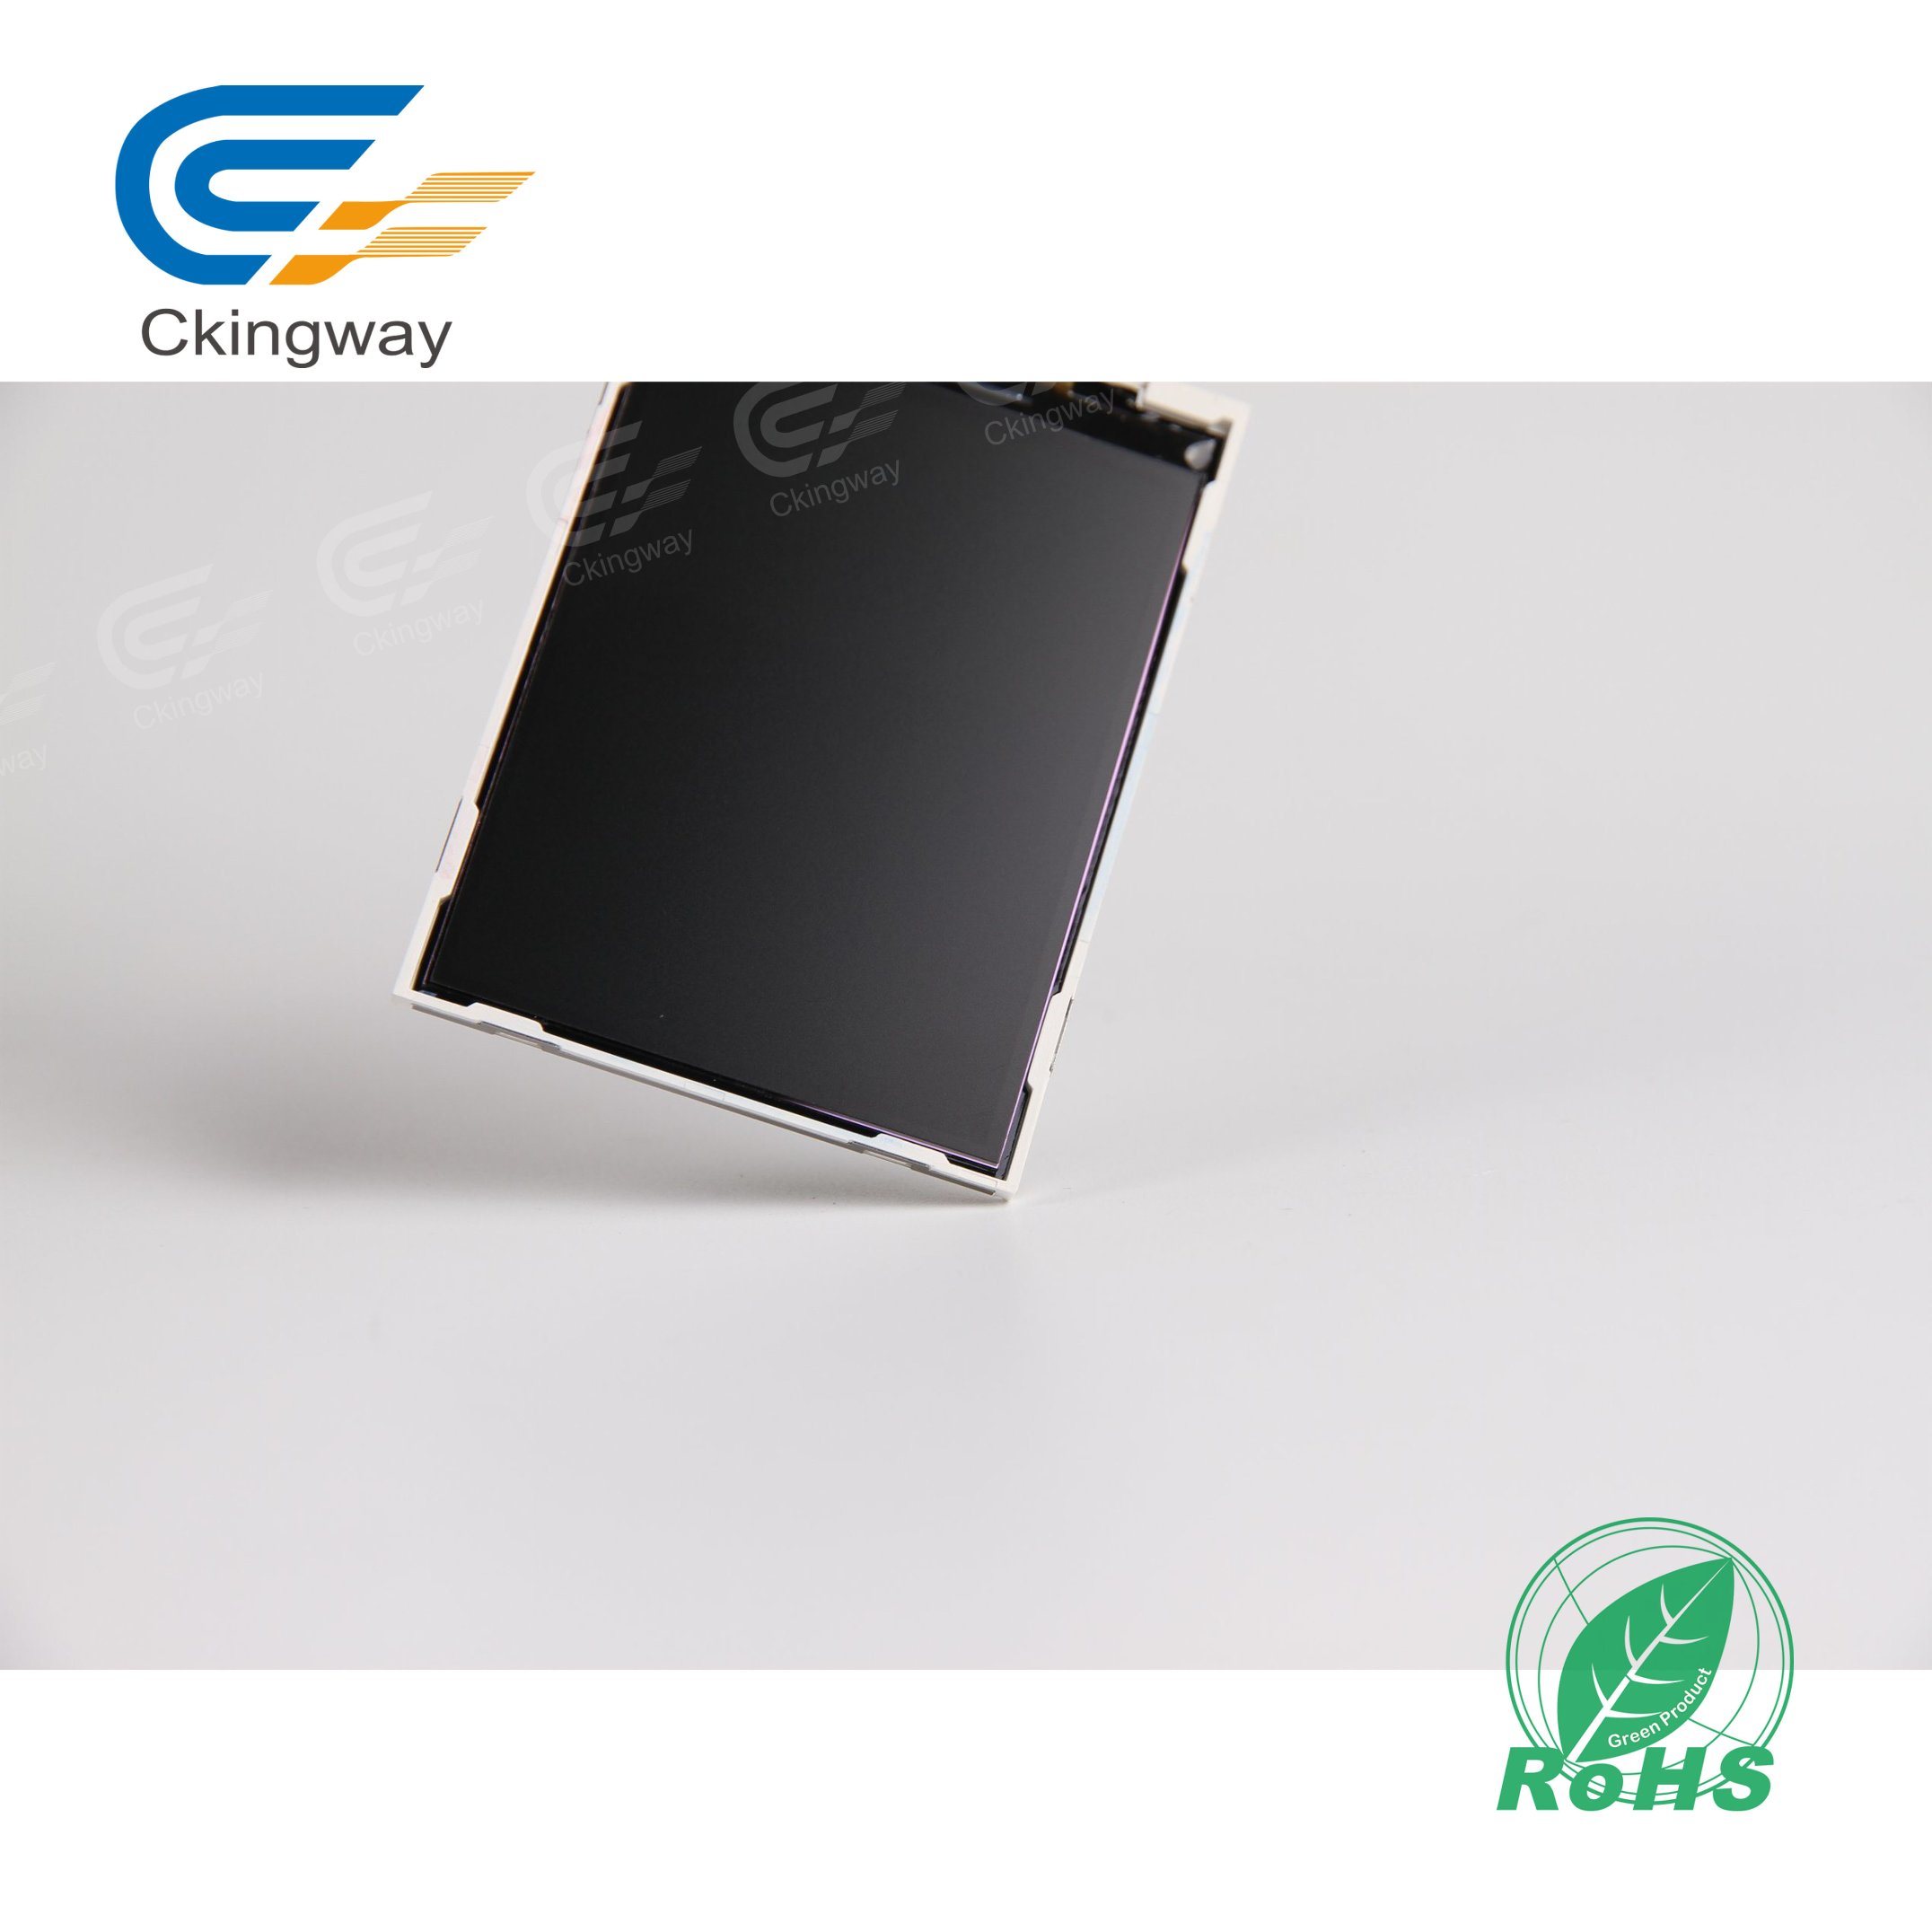 Digitizer Assembly 2.4 Inch TFT LCD Touch Screen for POS Terminals